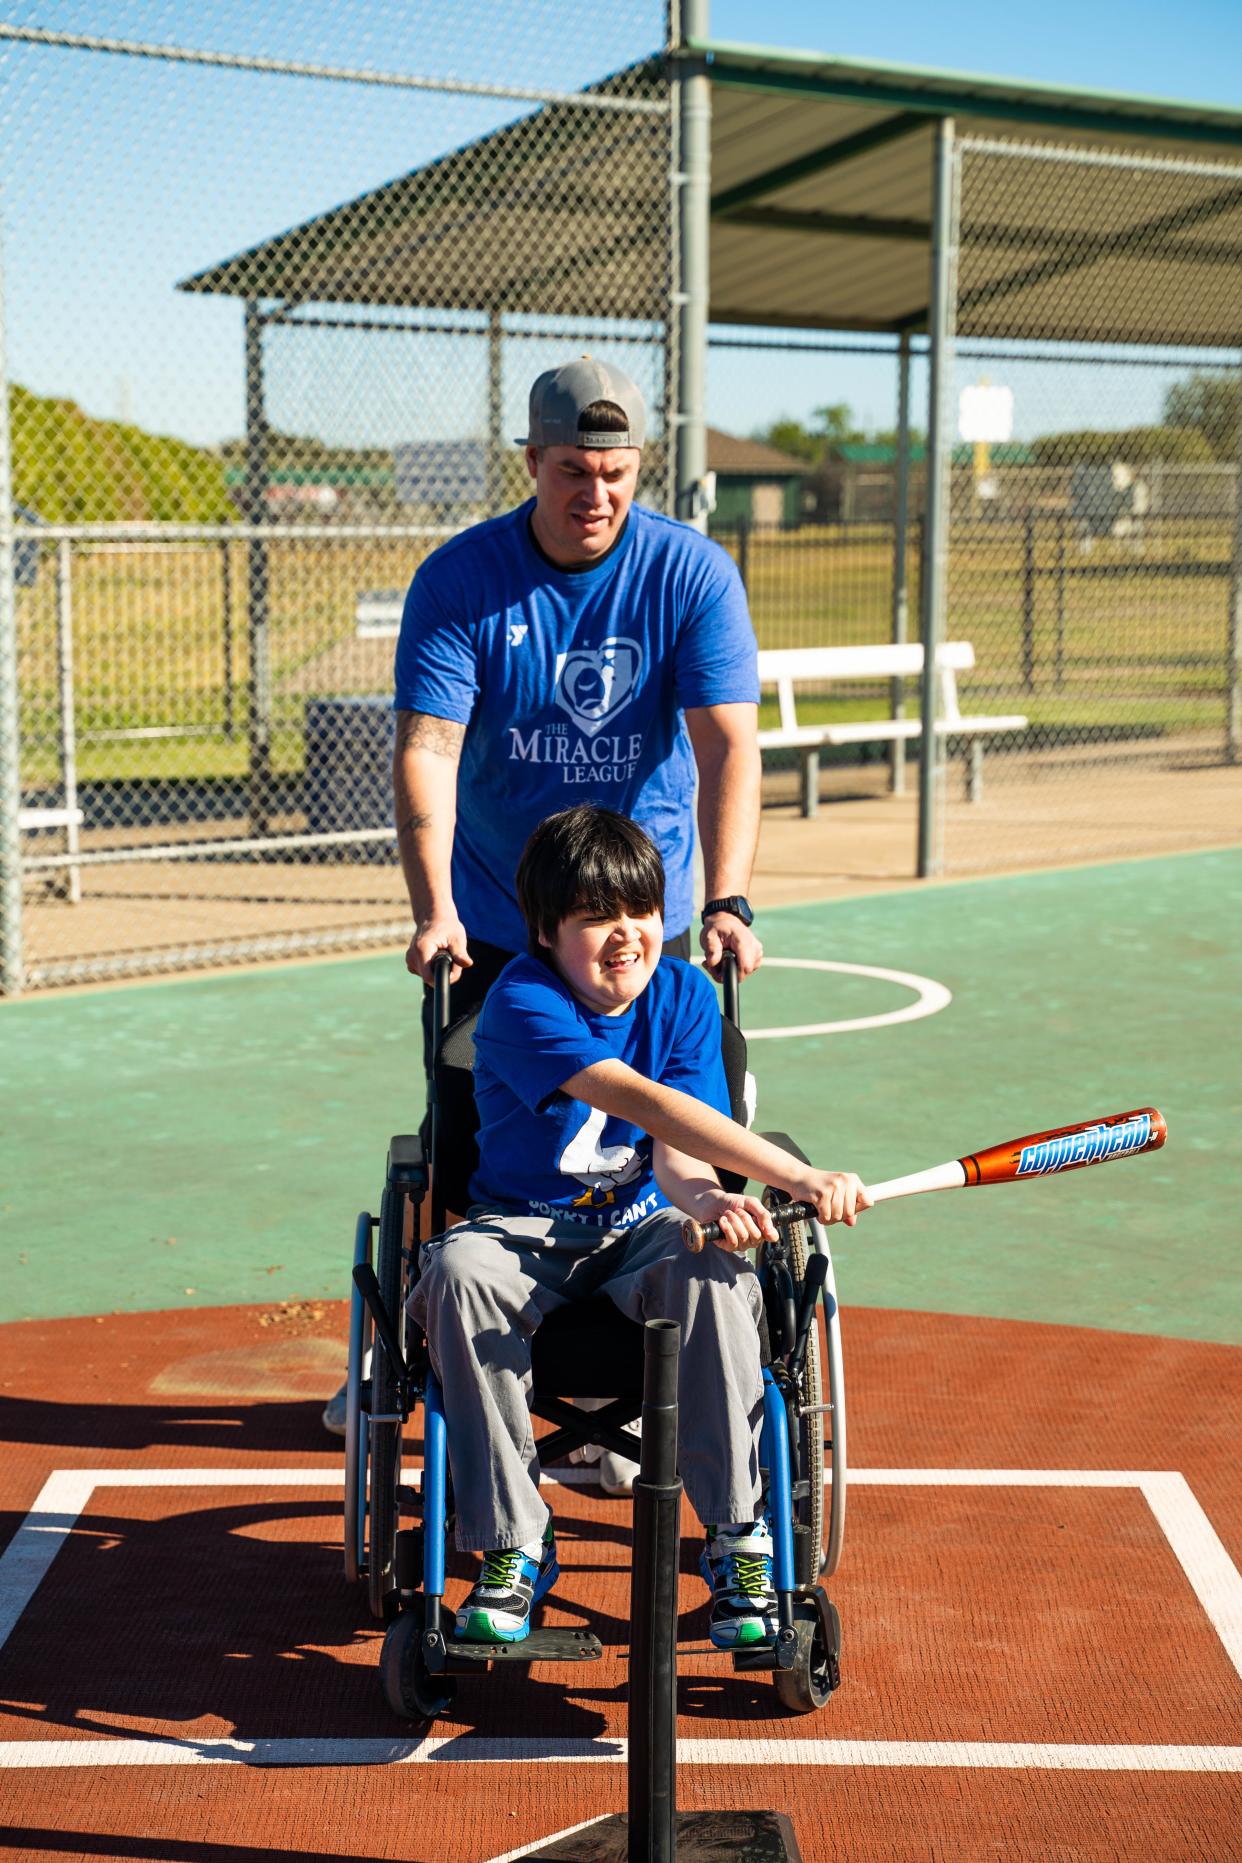 Each Miracle League participant is paired with a buddy who helps them in whatever way possible. The spring season begins April 1.